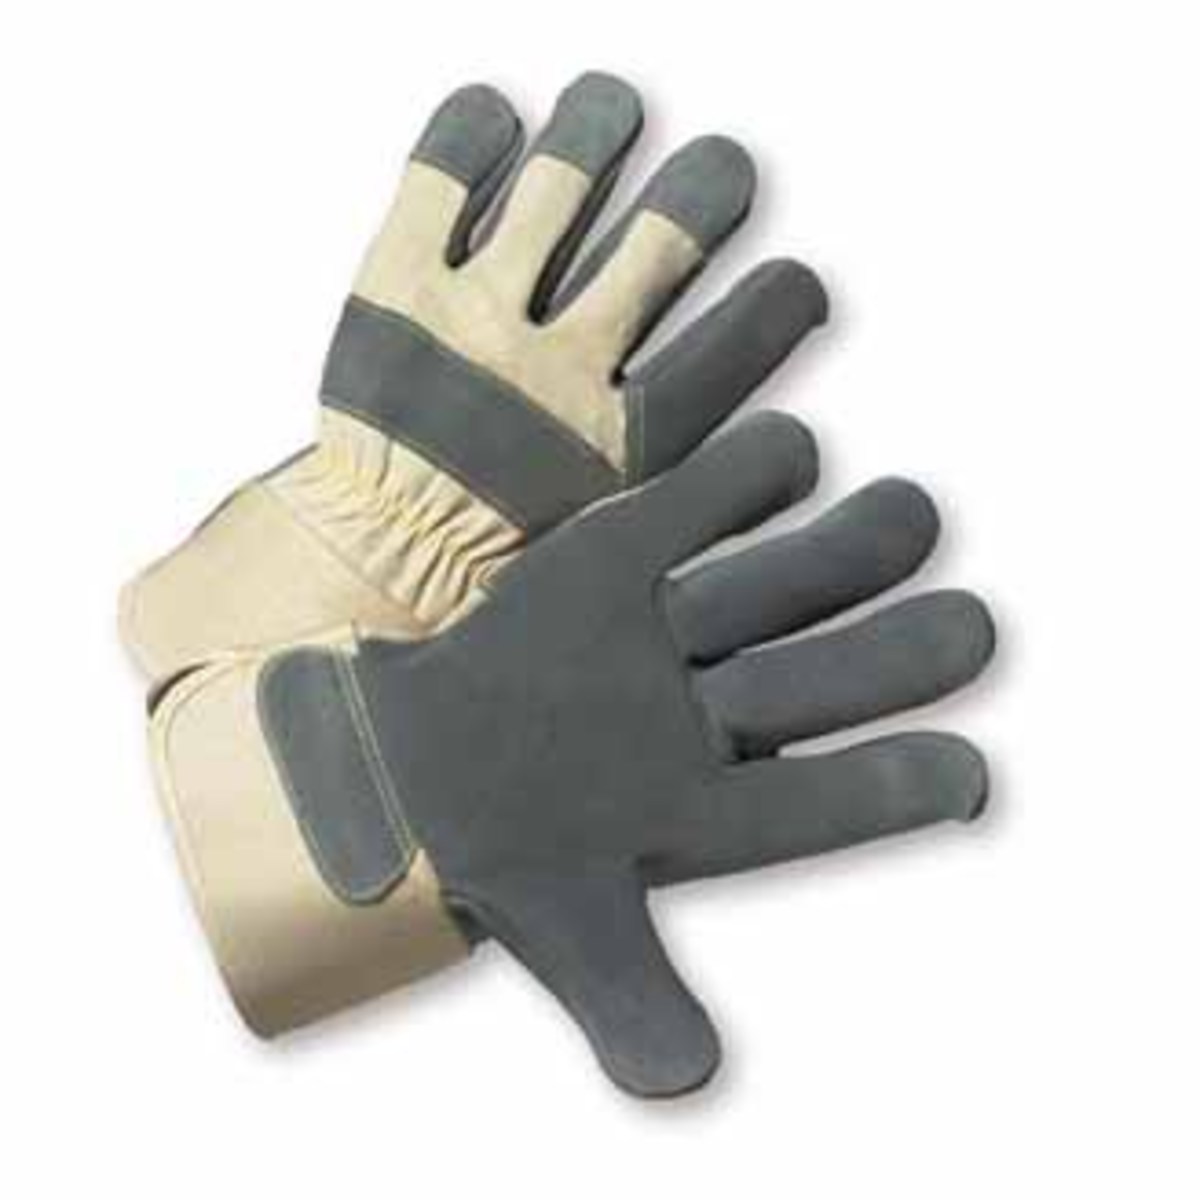 PIP® Small Premium Grain Cowhide Palm Gloves With Canvas Back And Rubberized Safety Cuff